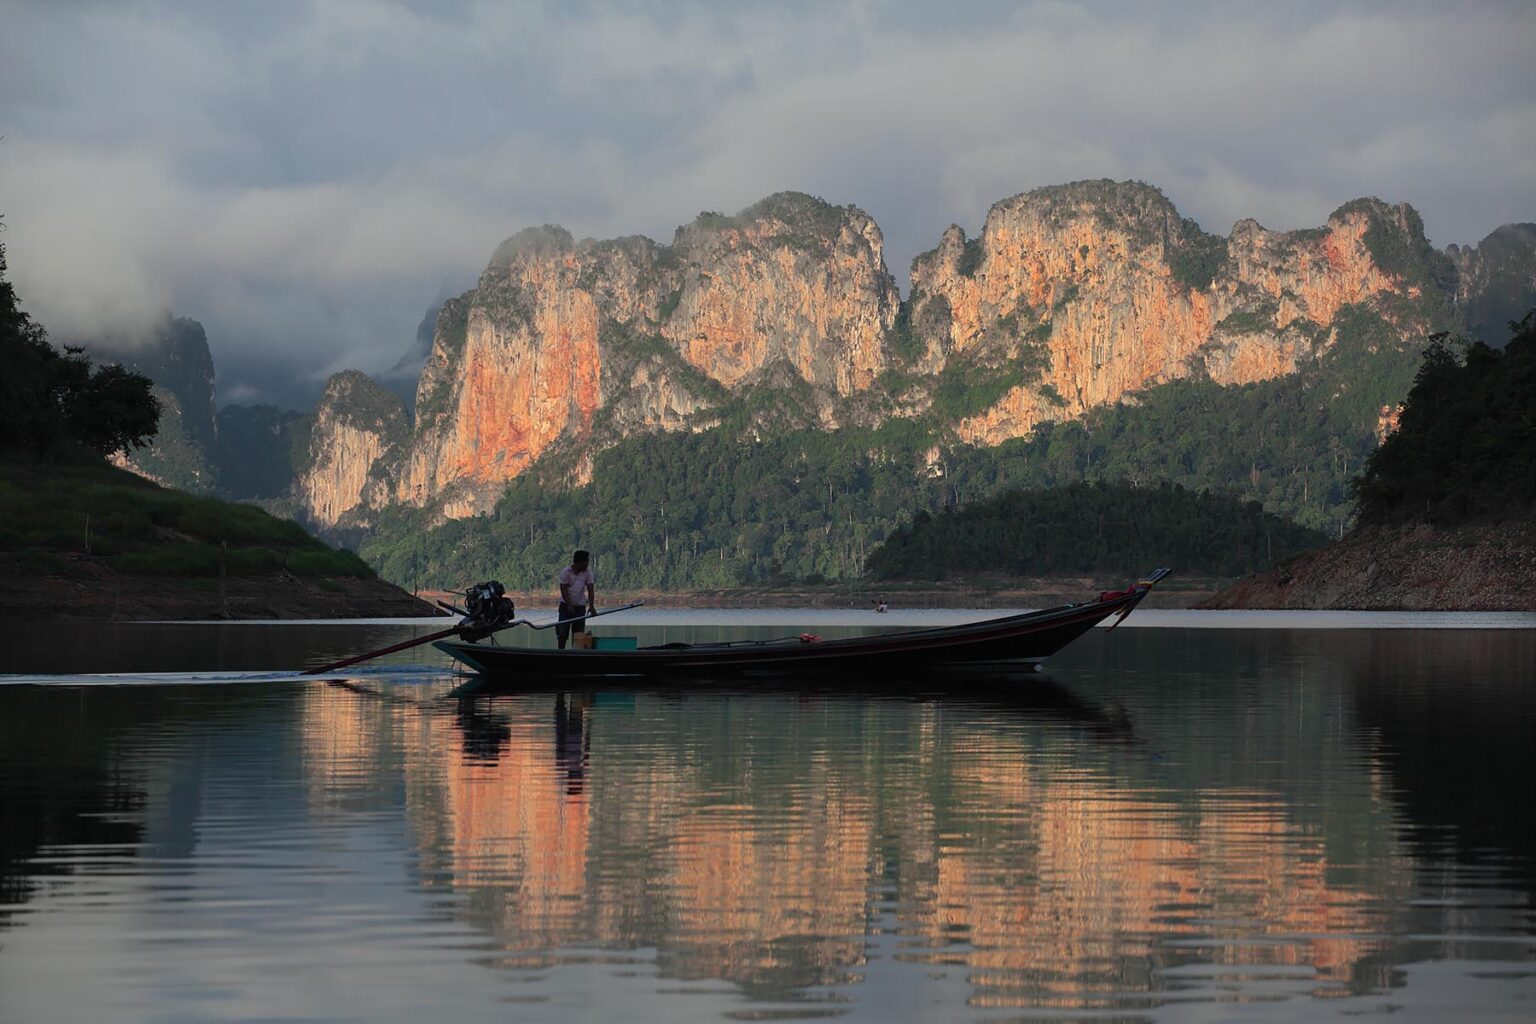 A long boat on KHAO SOK LAKE NATIONAL PARK KARST surrounded by karst formations - THAILAND